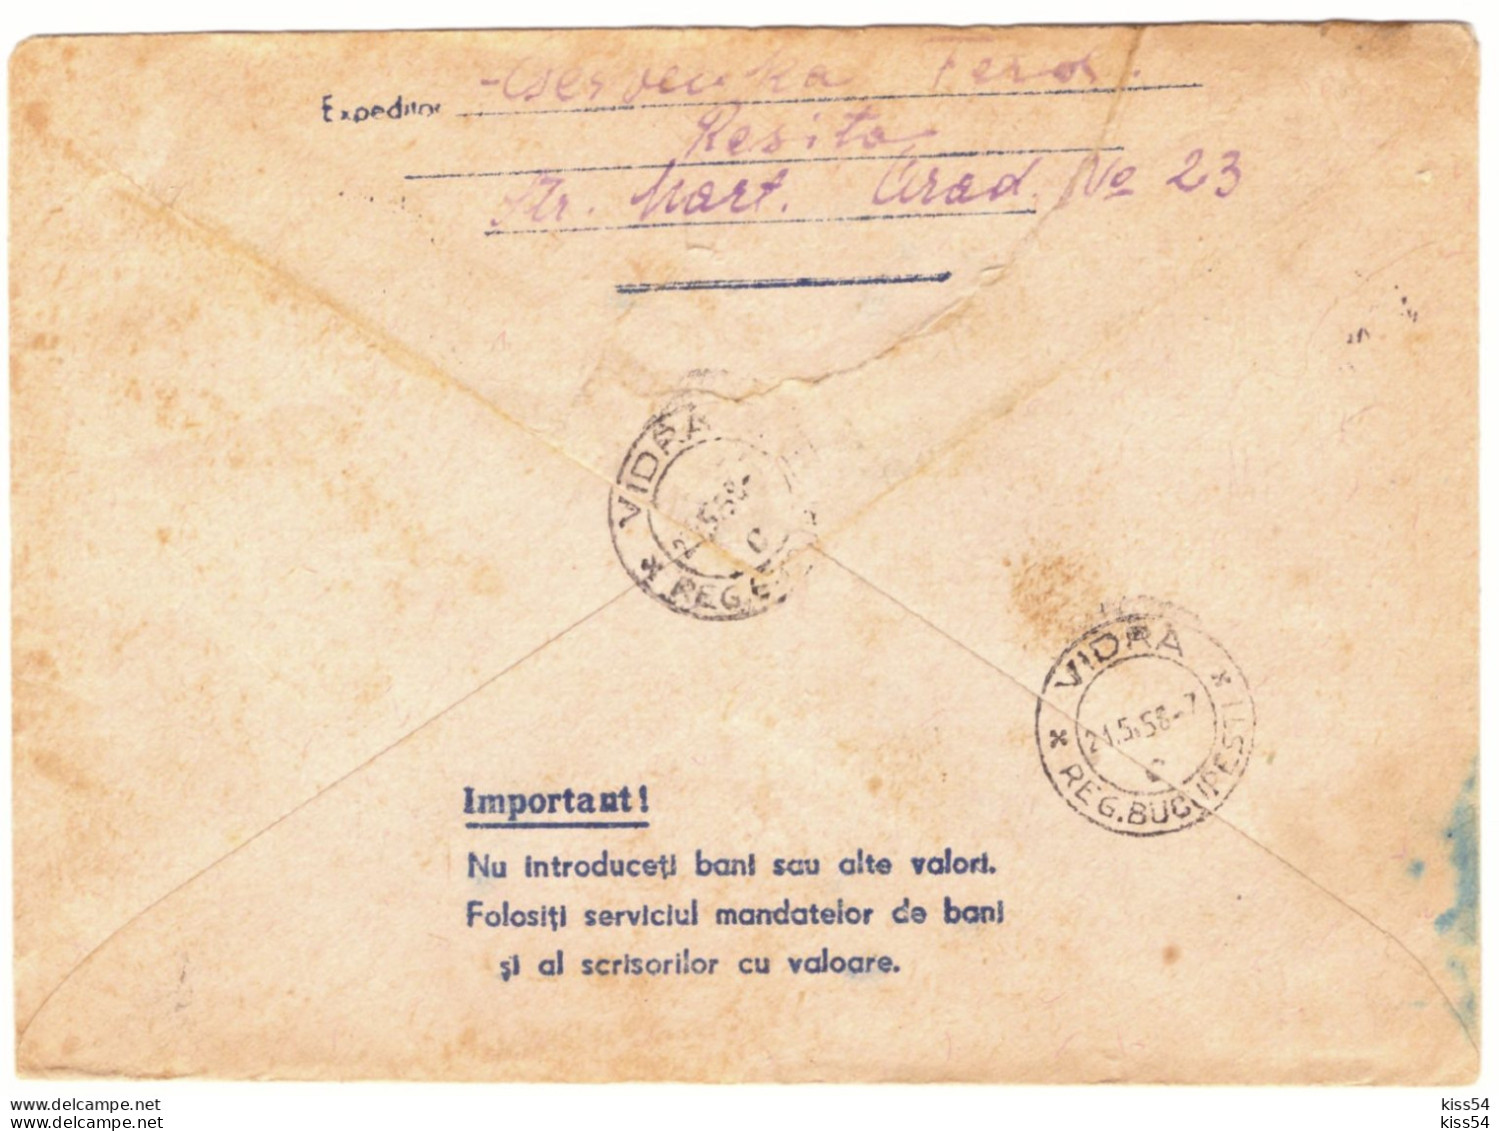 IP 57 - 08a Hydro Electricity ( Fixed Stamp LENIN ), Romania - Stationery - Used - 1957 - Wasser